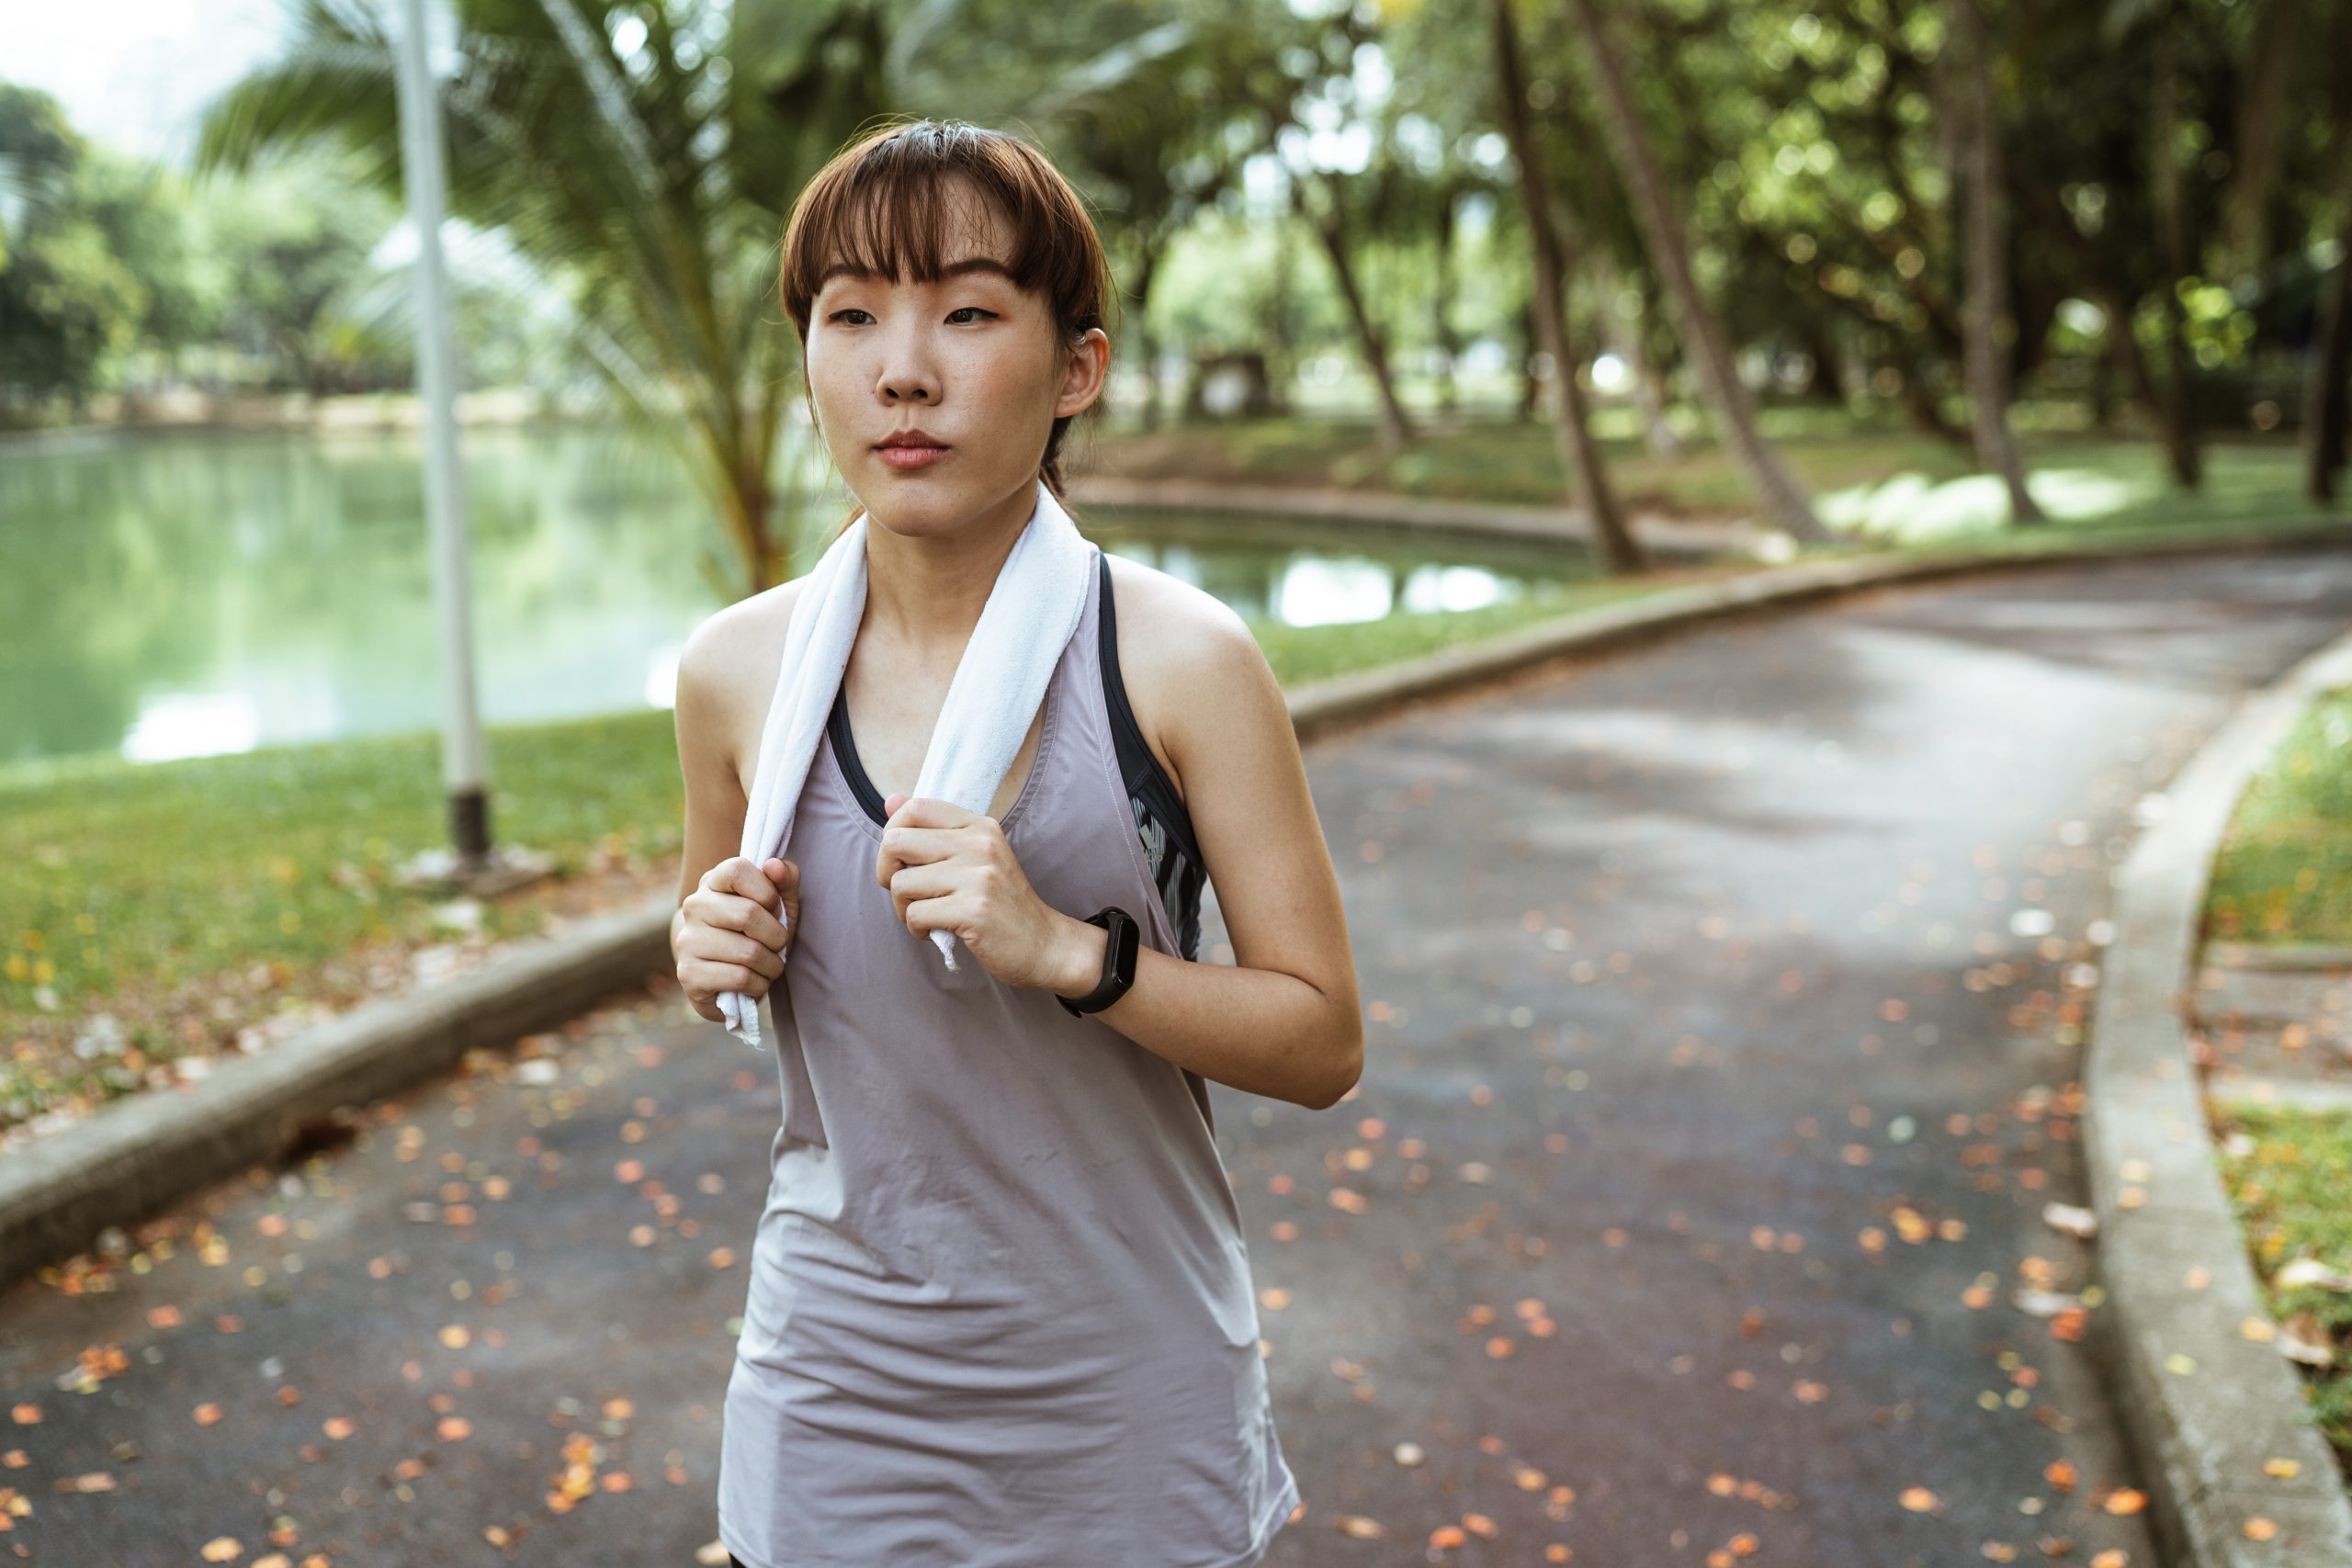 Confident woman with towel running in park